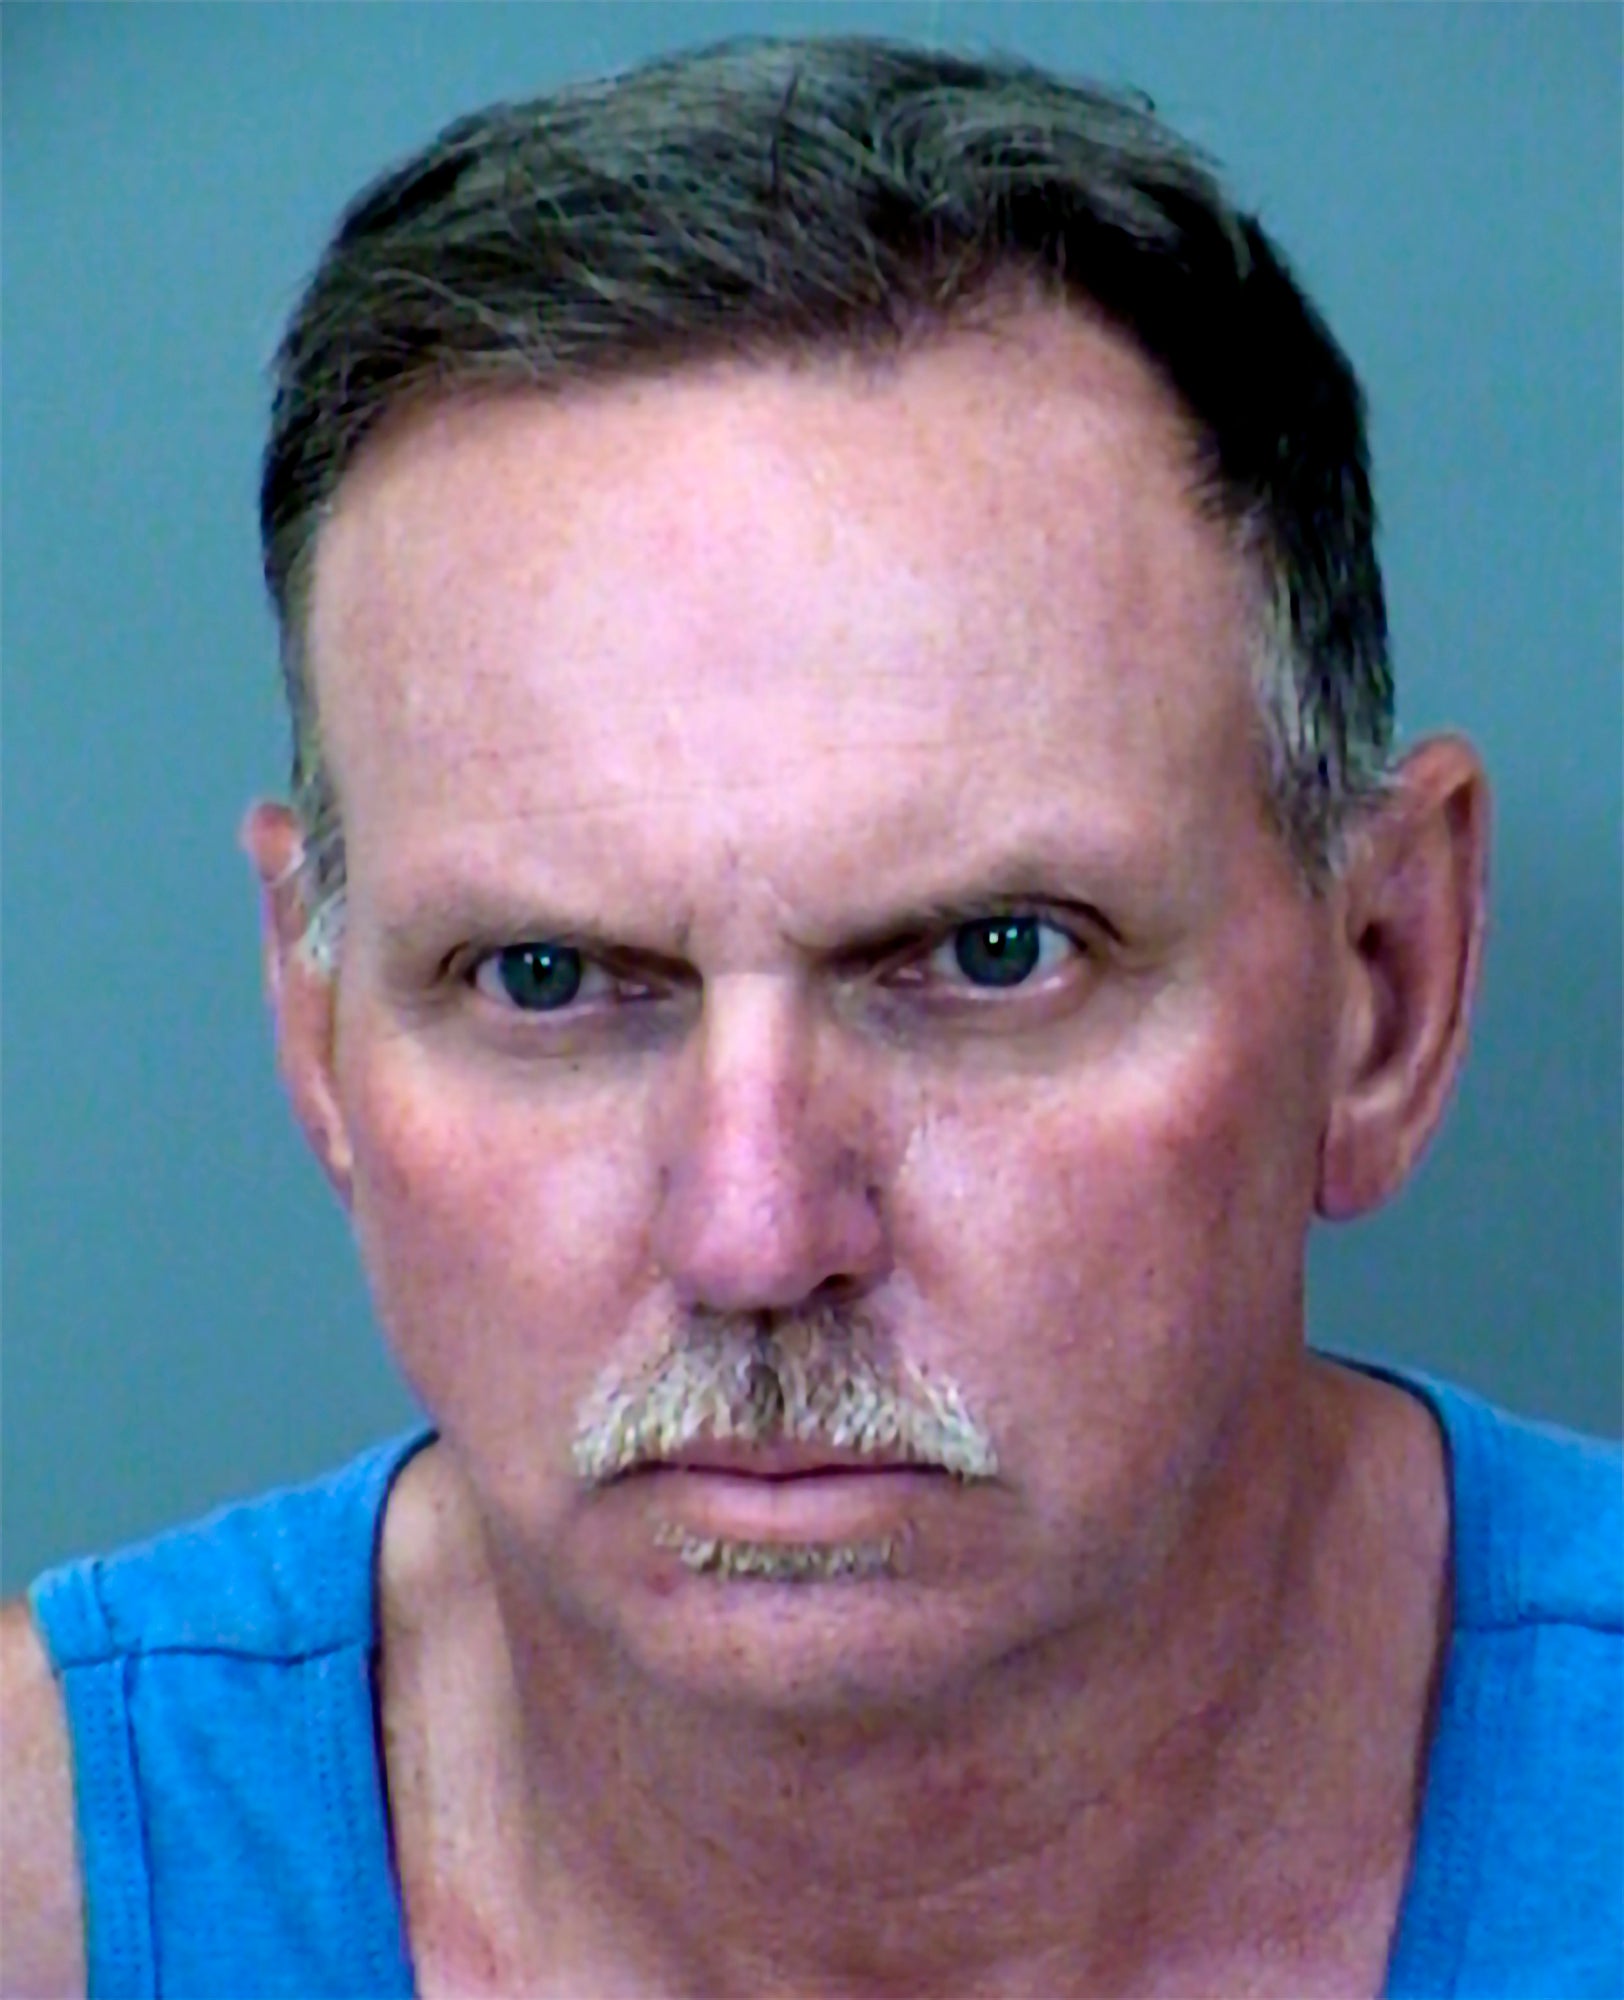 Landon Earl Rankin, 54, who was arrested Wednesday, May 4, 2022, in two thefts of wedding gifts at private venues in April and was being held without bond, according to Chandler police